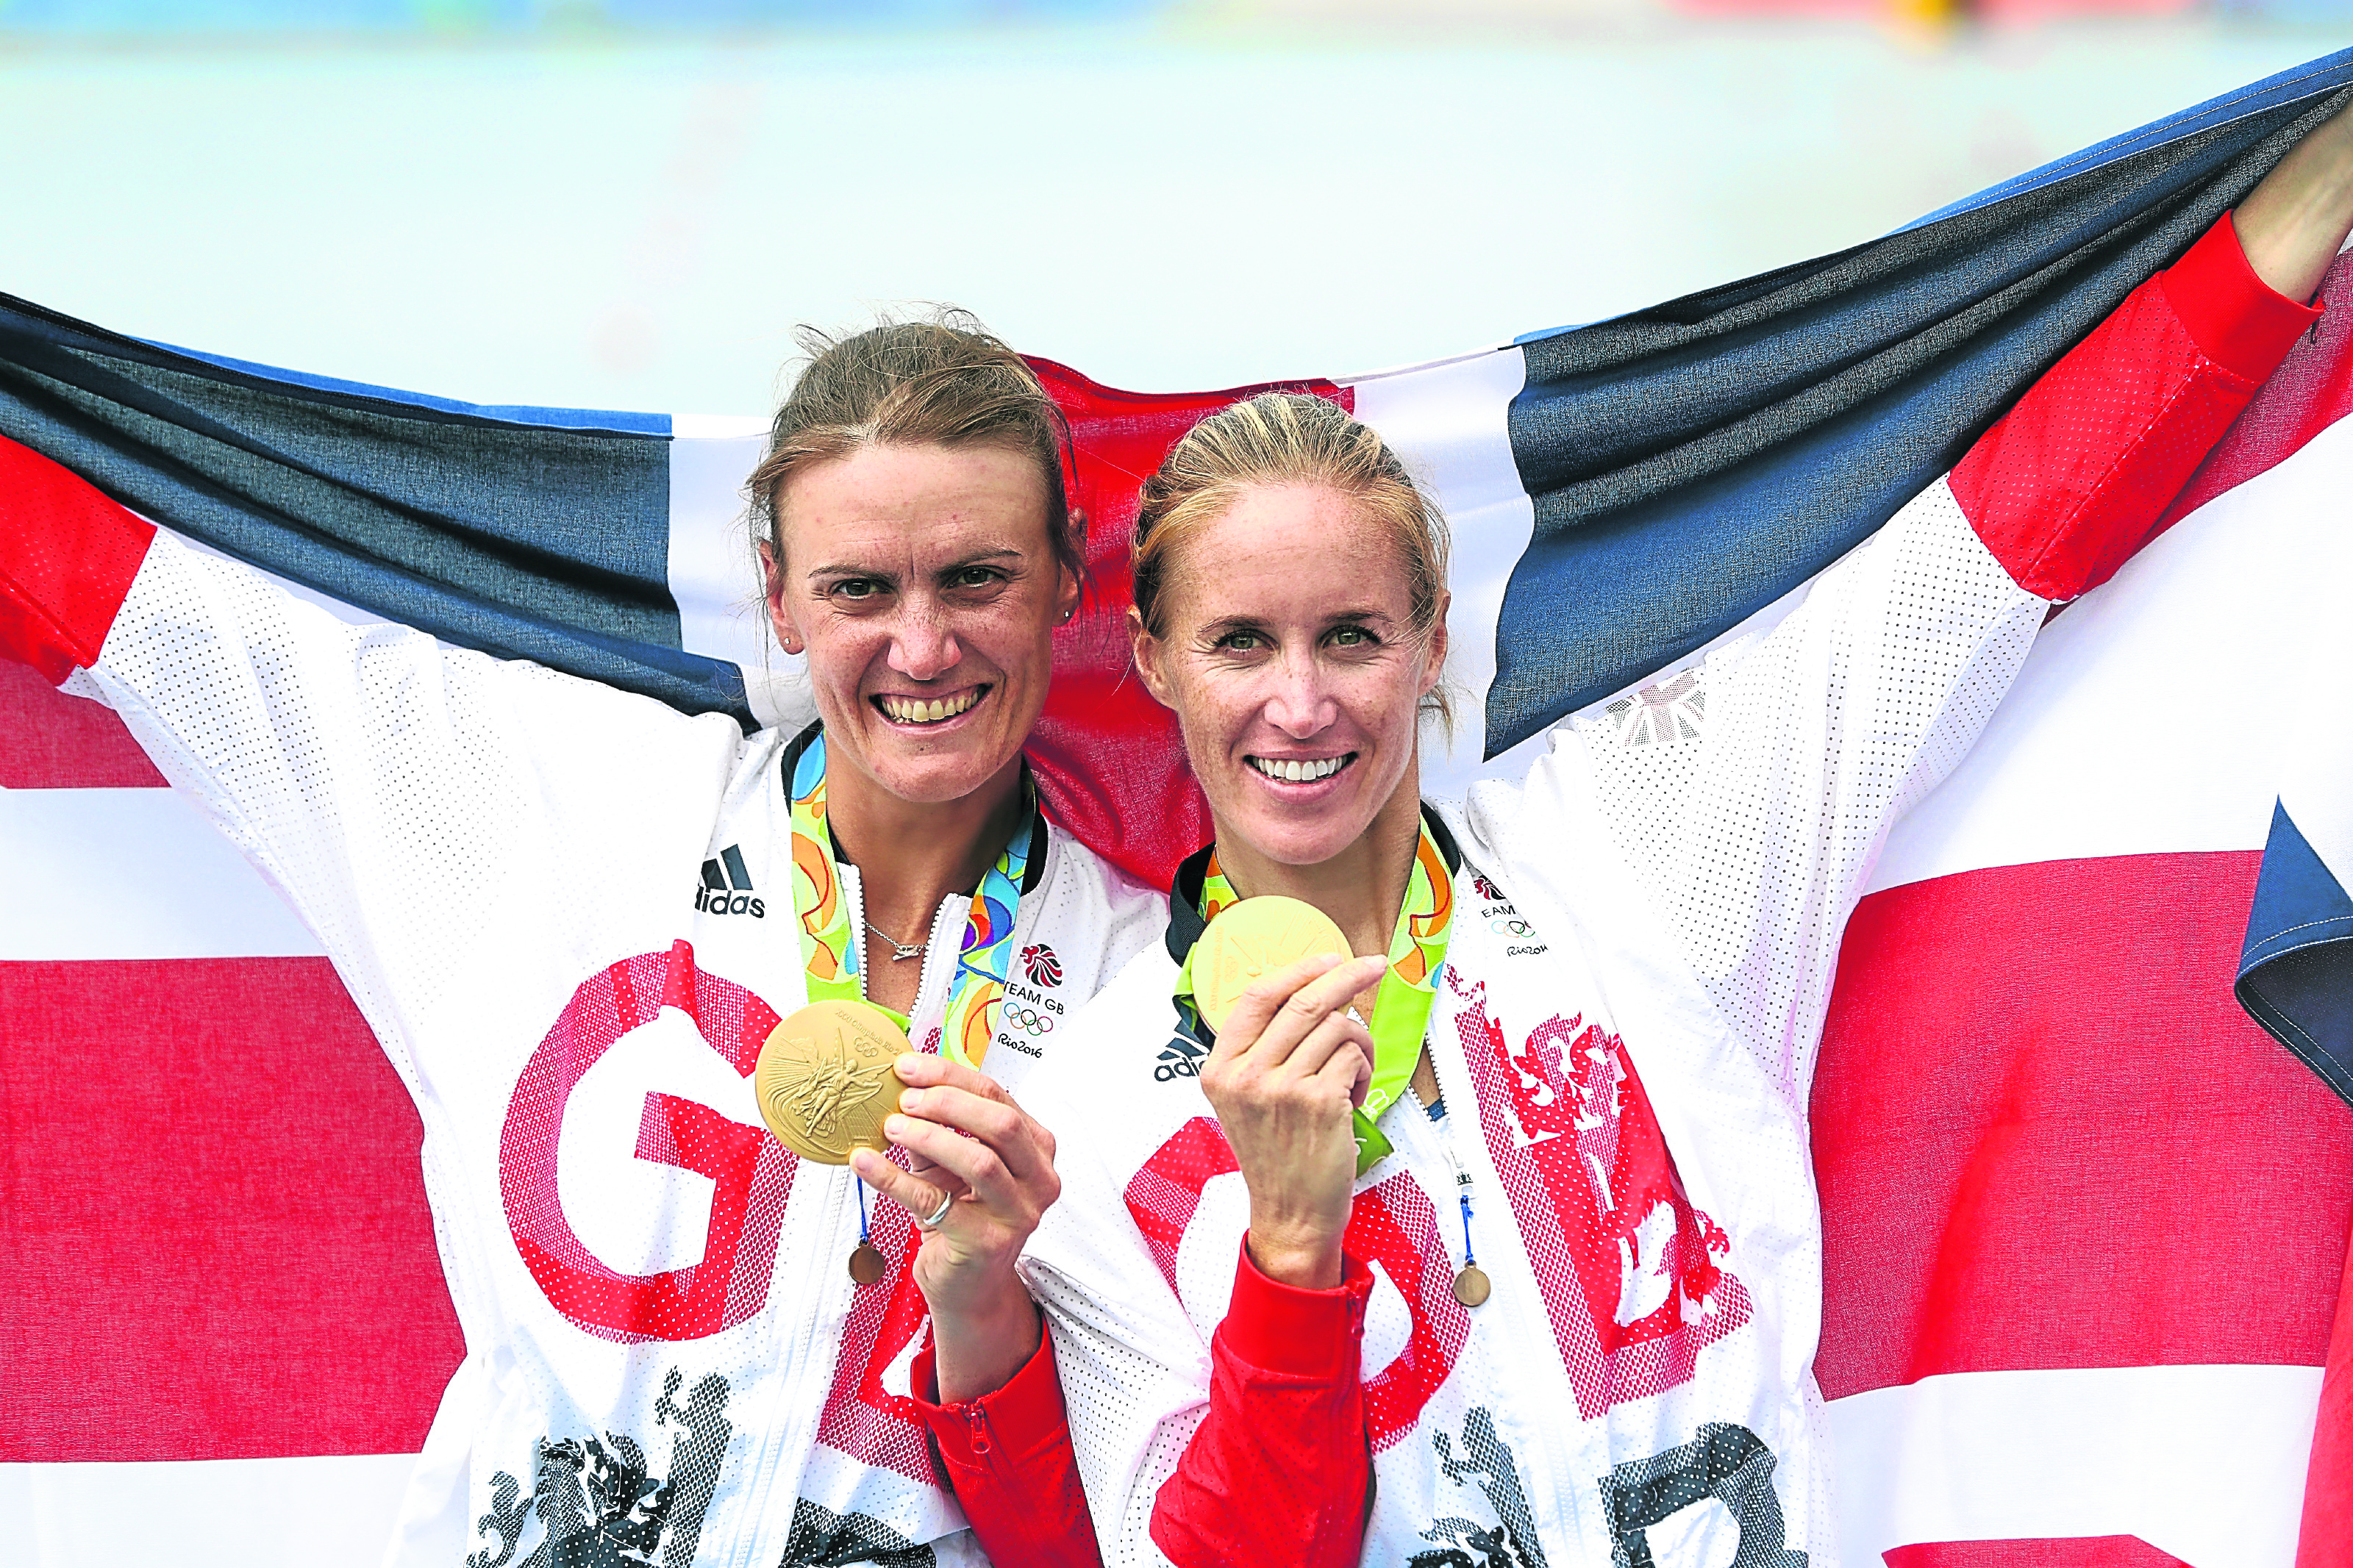 Gold medallists Helen Glover (R) and Heather Stanning (L) of Great Britain (Photo by Ezra Shaw/Getty Images)